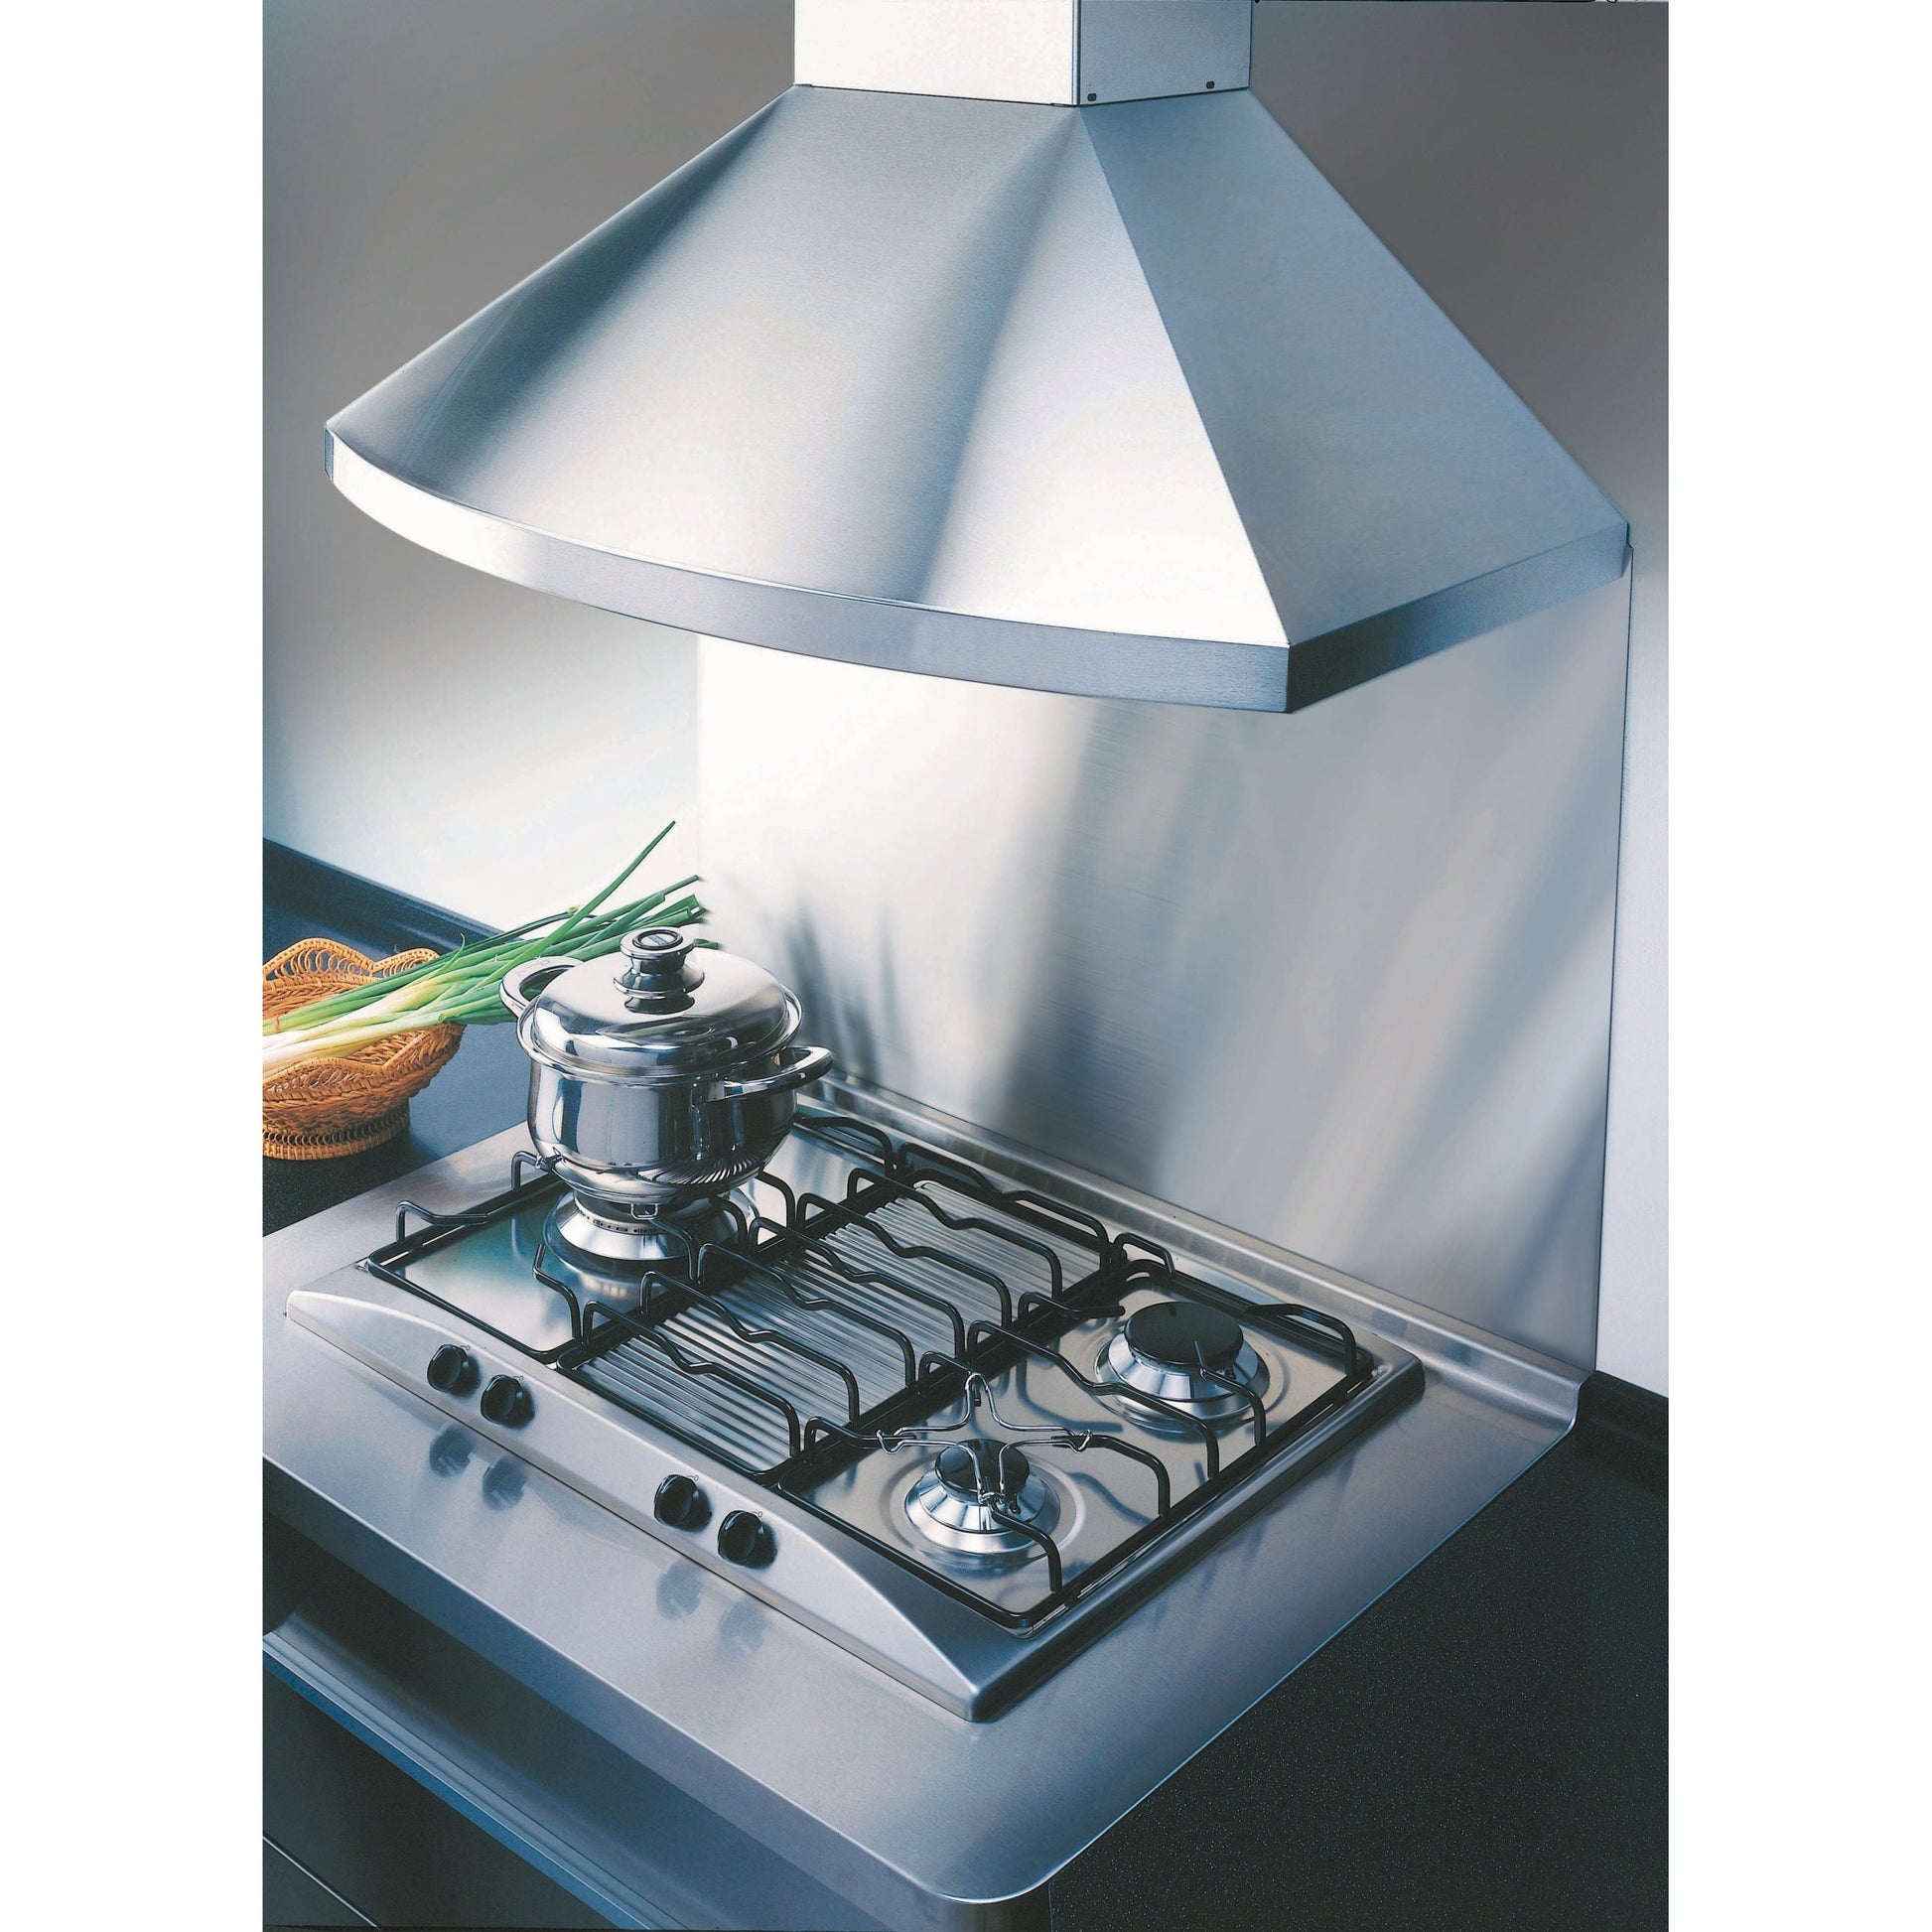 KOBE Premium RA92 SQB6-XX Series 30" Wall Mount Range Hood With 600 CFM Internal Blower, 6-Speed Electronic Control, Flame and Temperature Sensor,  
Delay Shut Off, and LED Lights